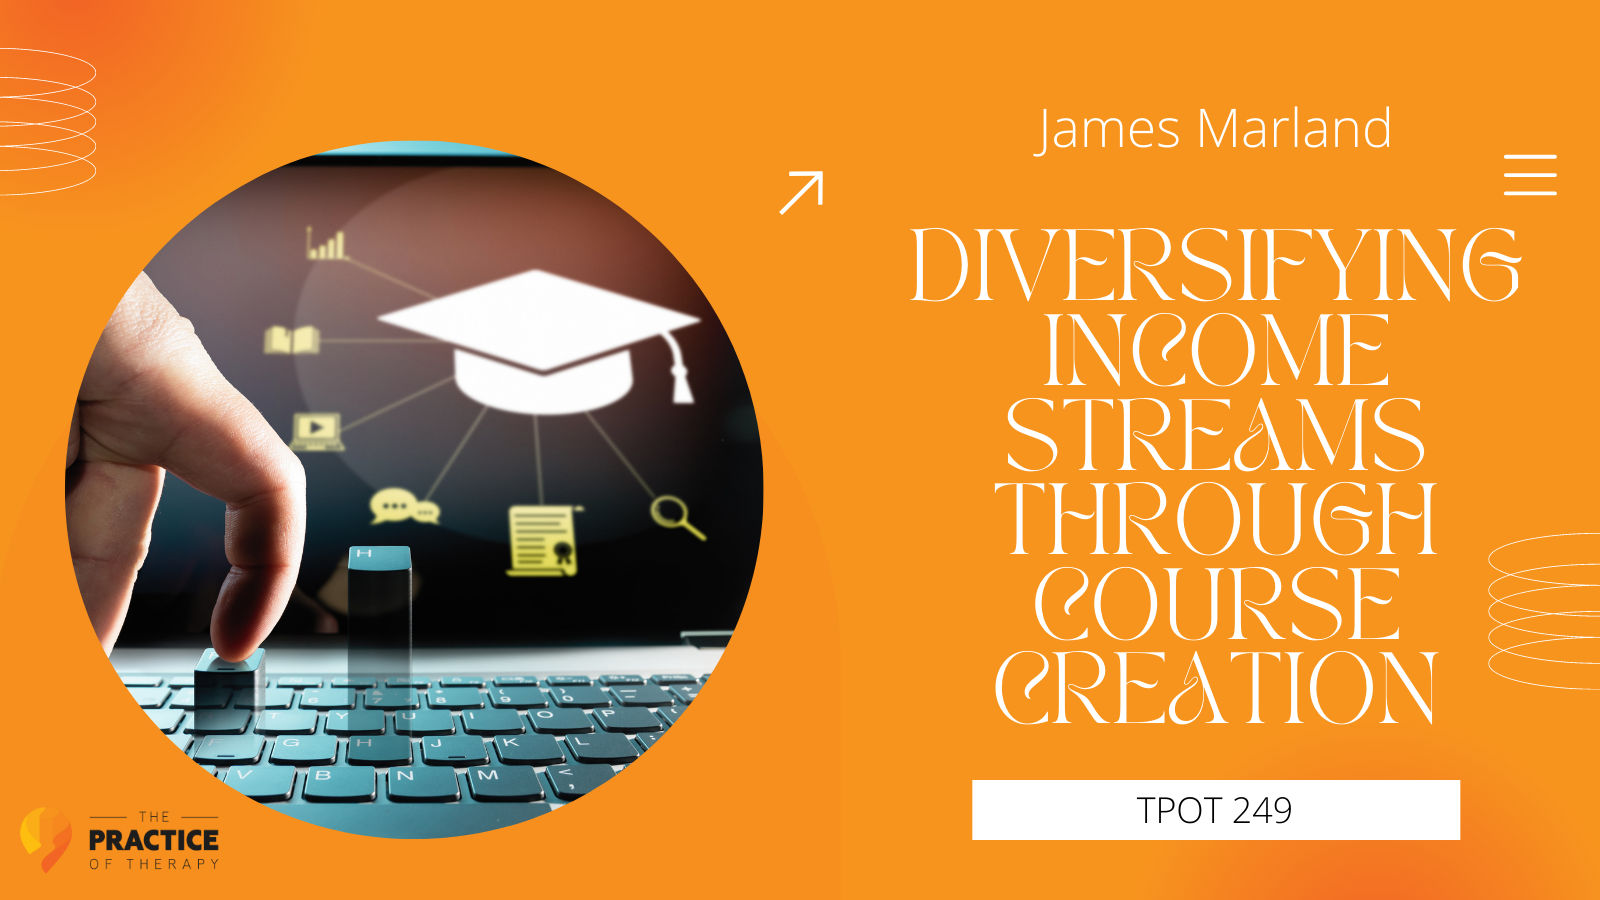 James Marland | Diversifying Income Streams Through Course Creation | TPOT 249